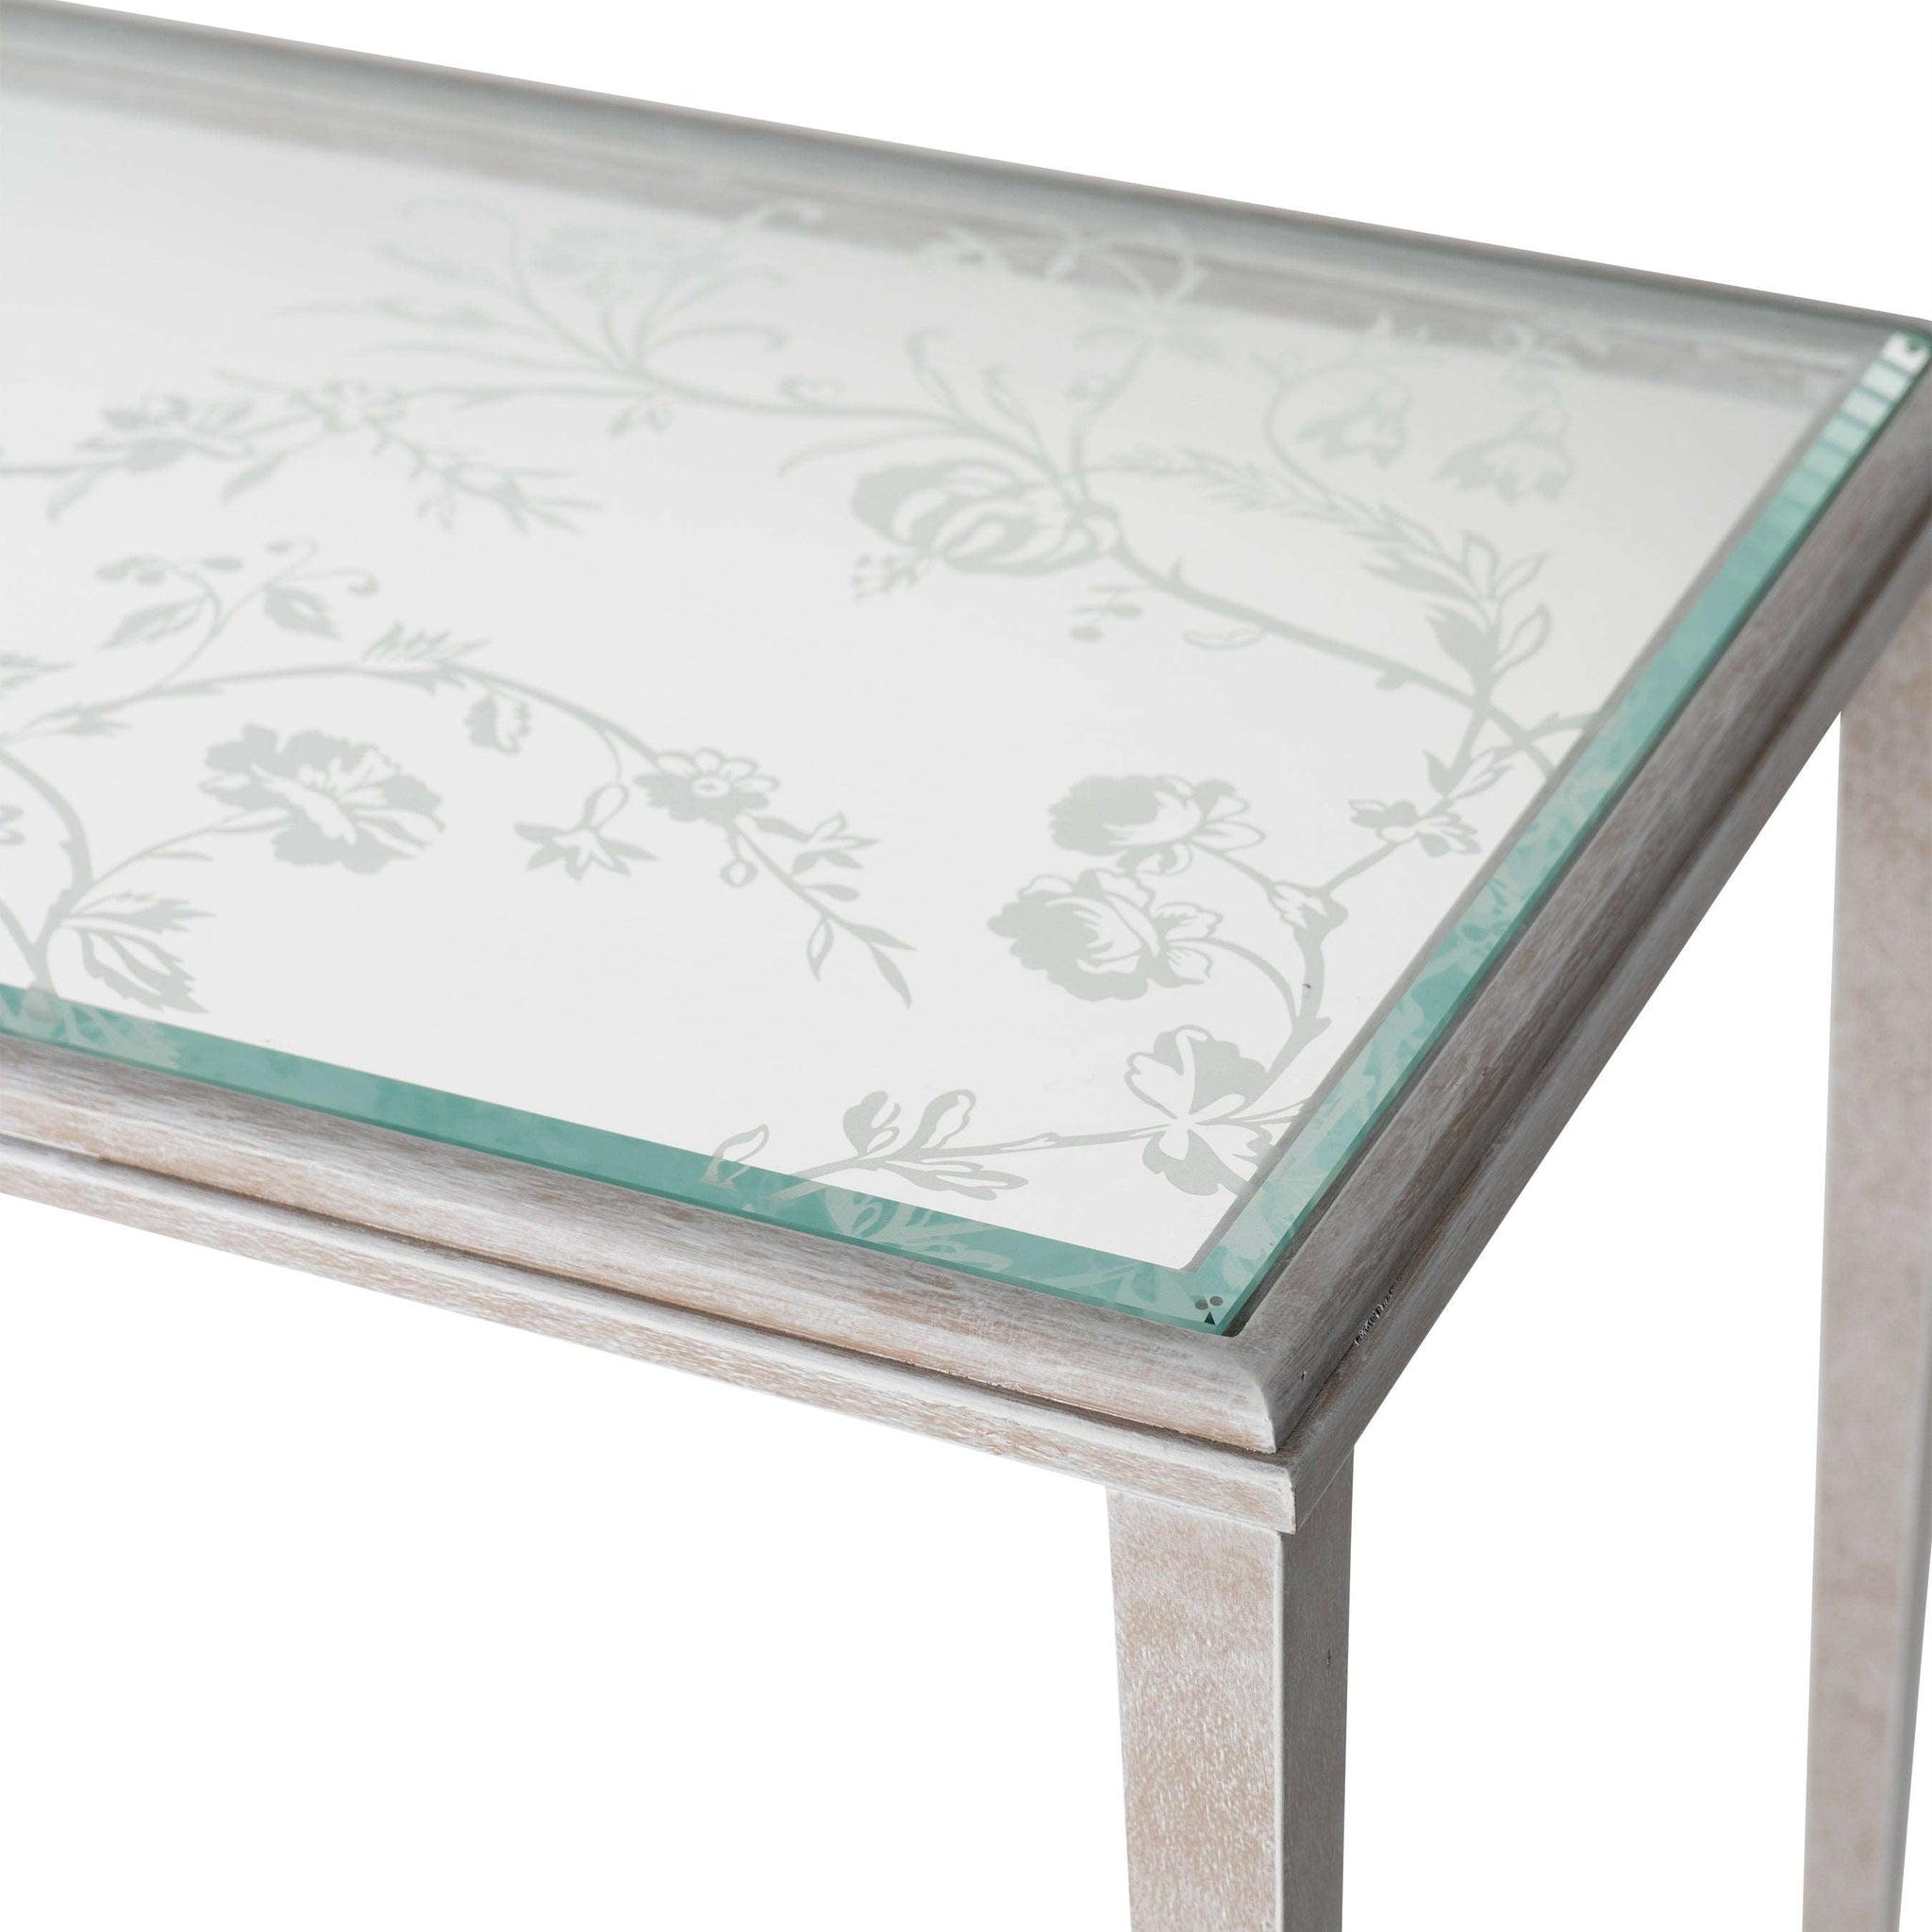 Arlo Etched Glass Distressed White Iron Console Table